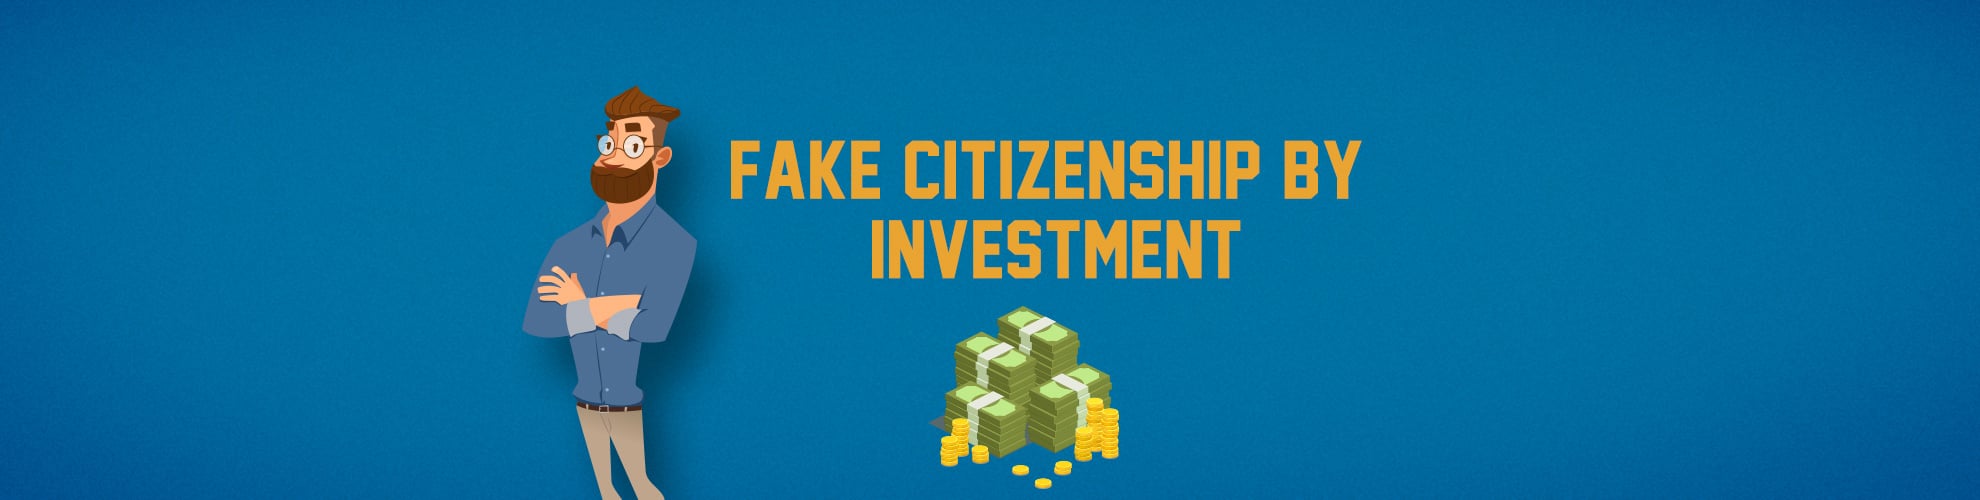 Fake Citizenship By Investment